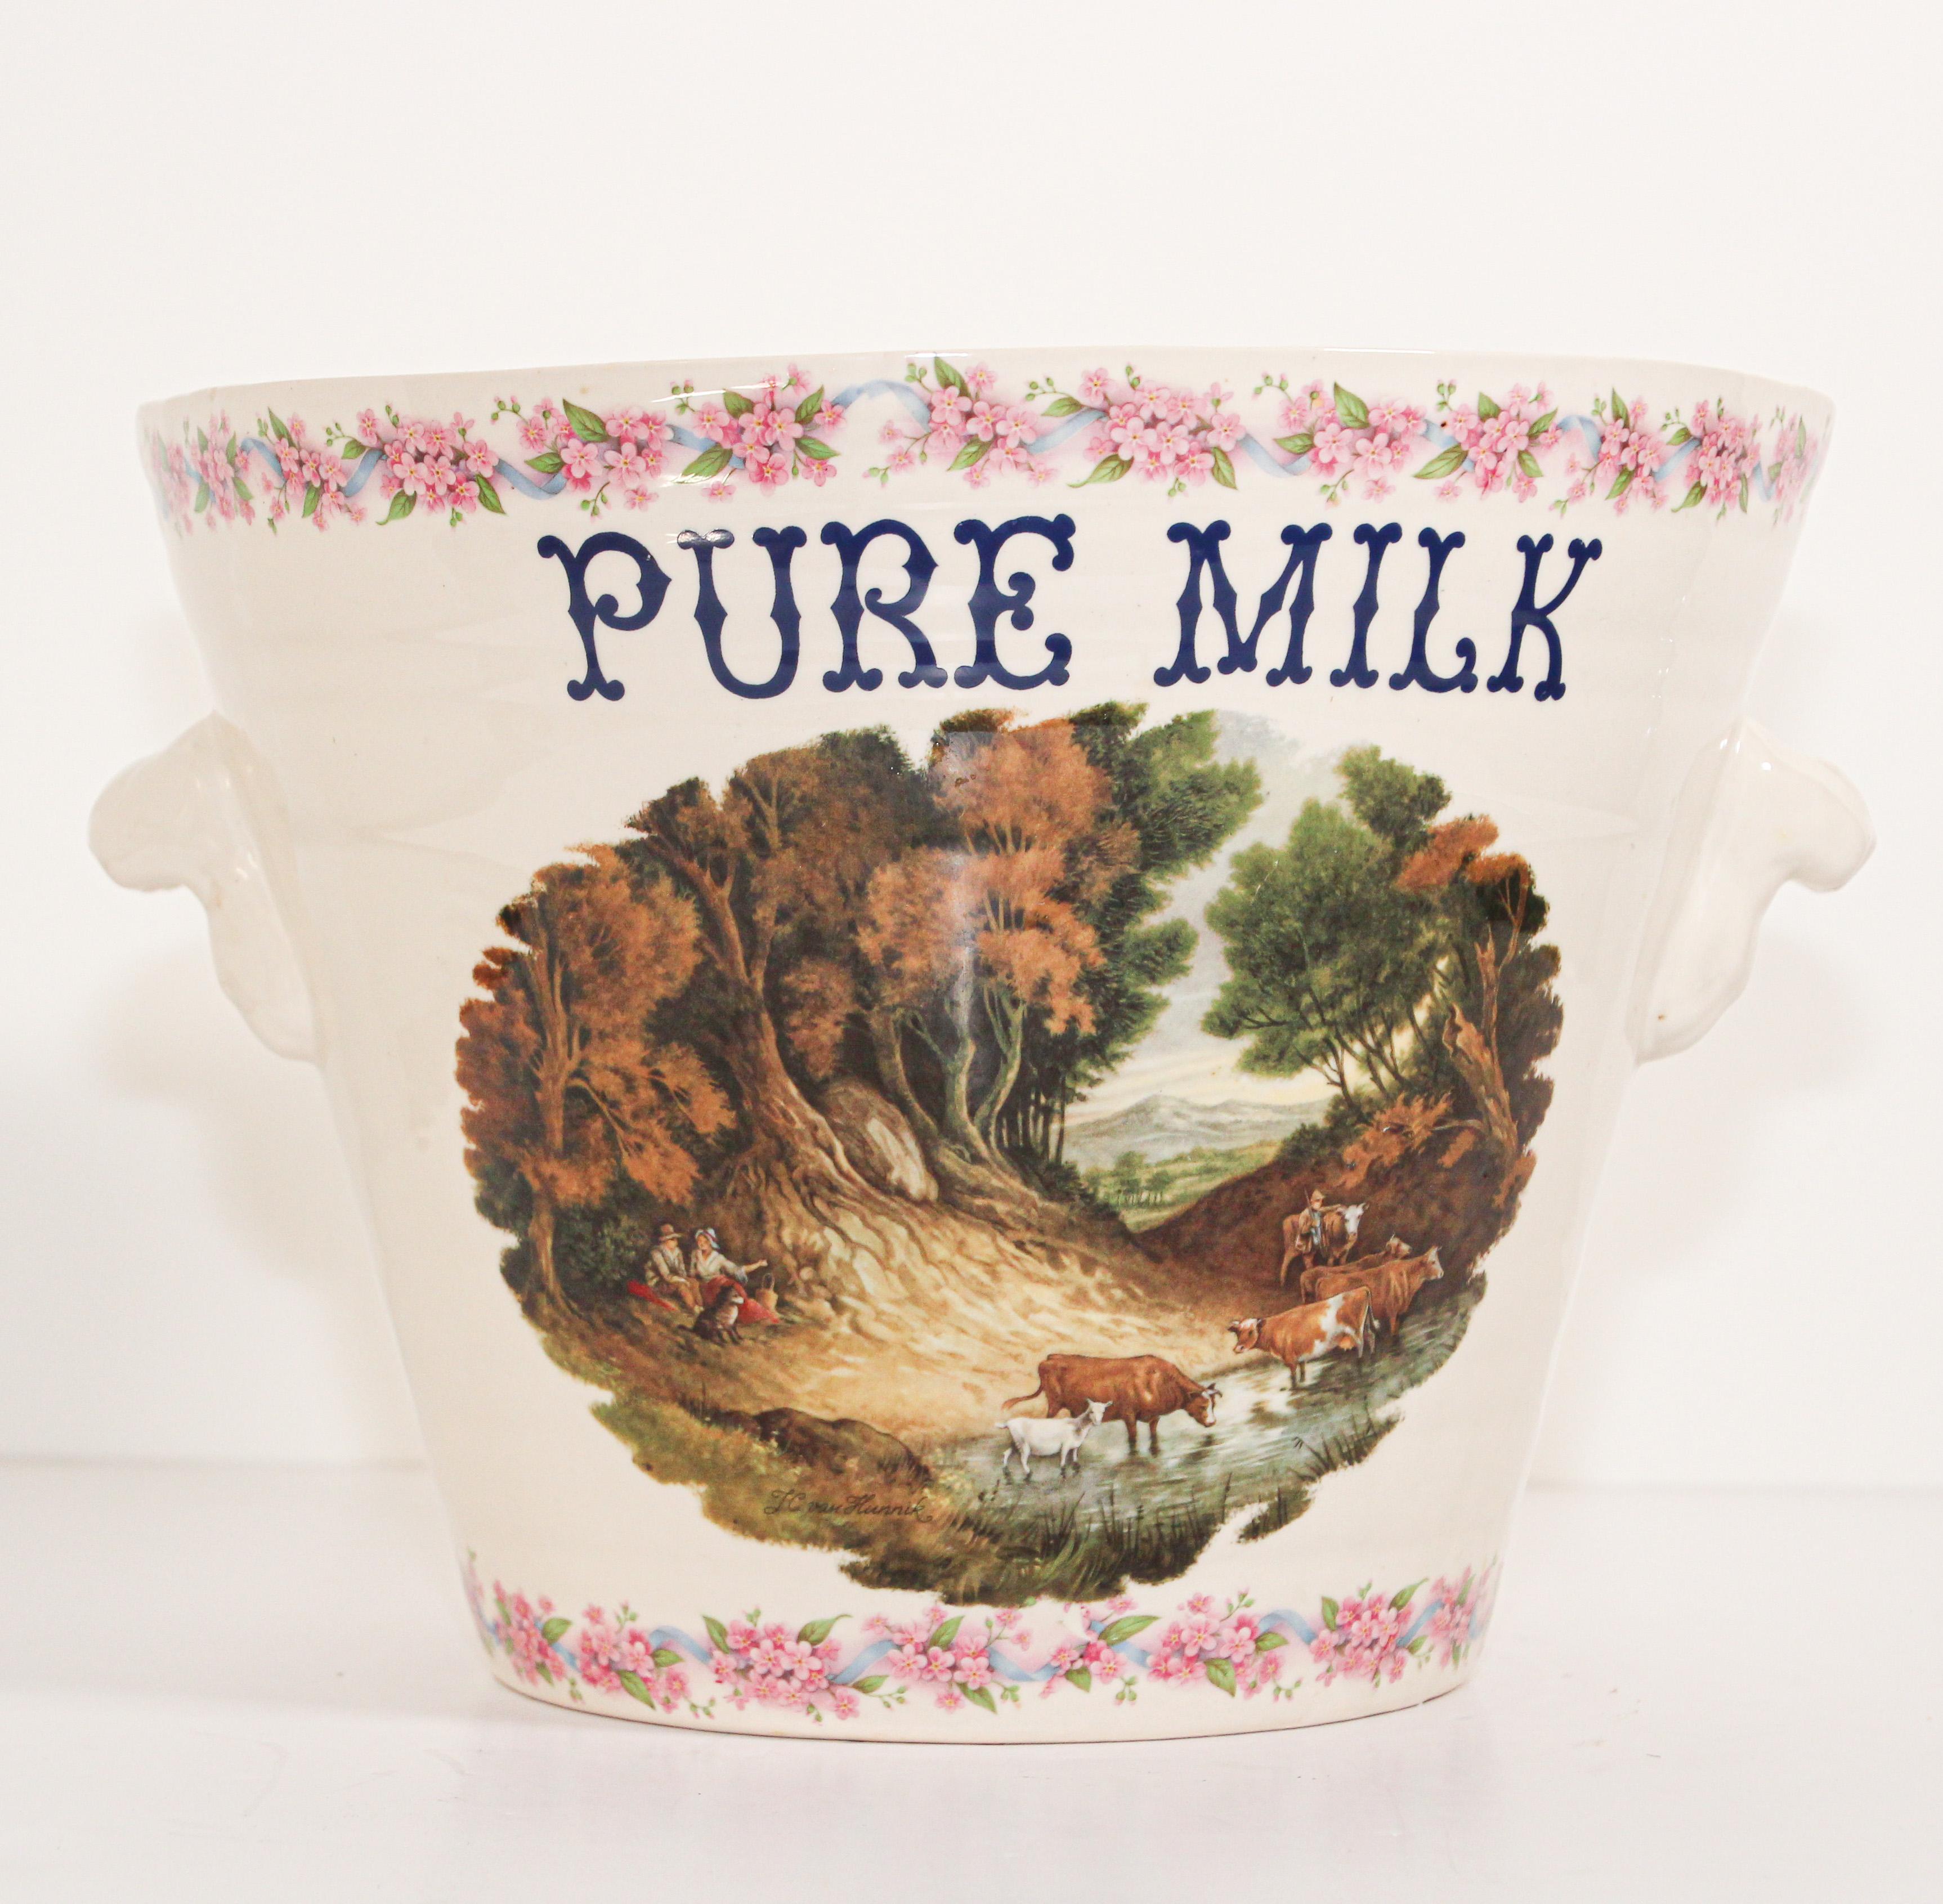 All time lassic large English ironstone Pure Milk pail, made for the Co-operative Society printed with the Classic image of two cows in a field.
Used during the Edwardian period of the late 1800s, early 1900s, and used in grocery stores and